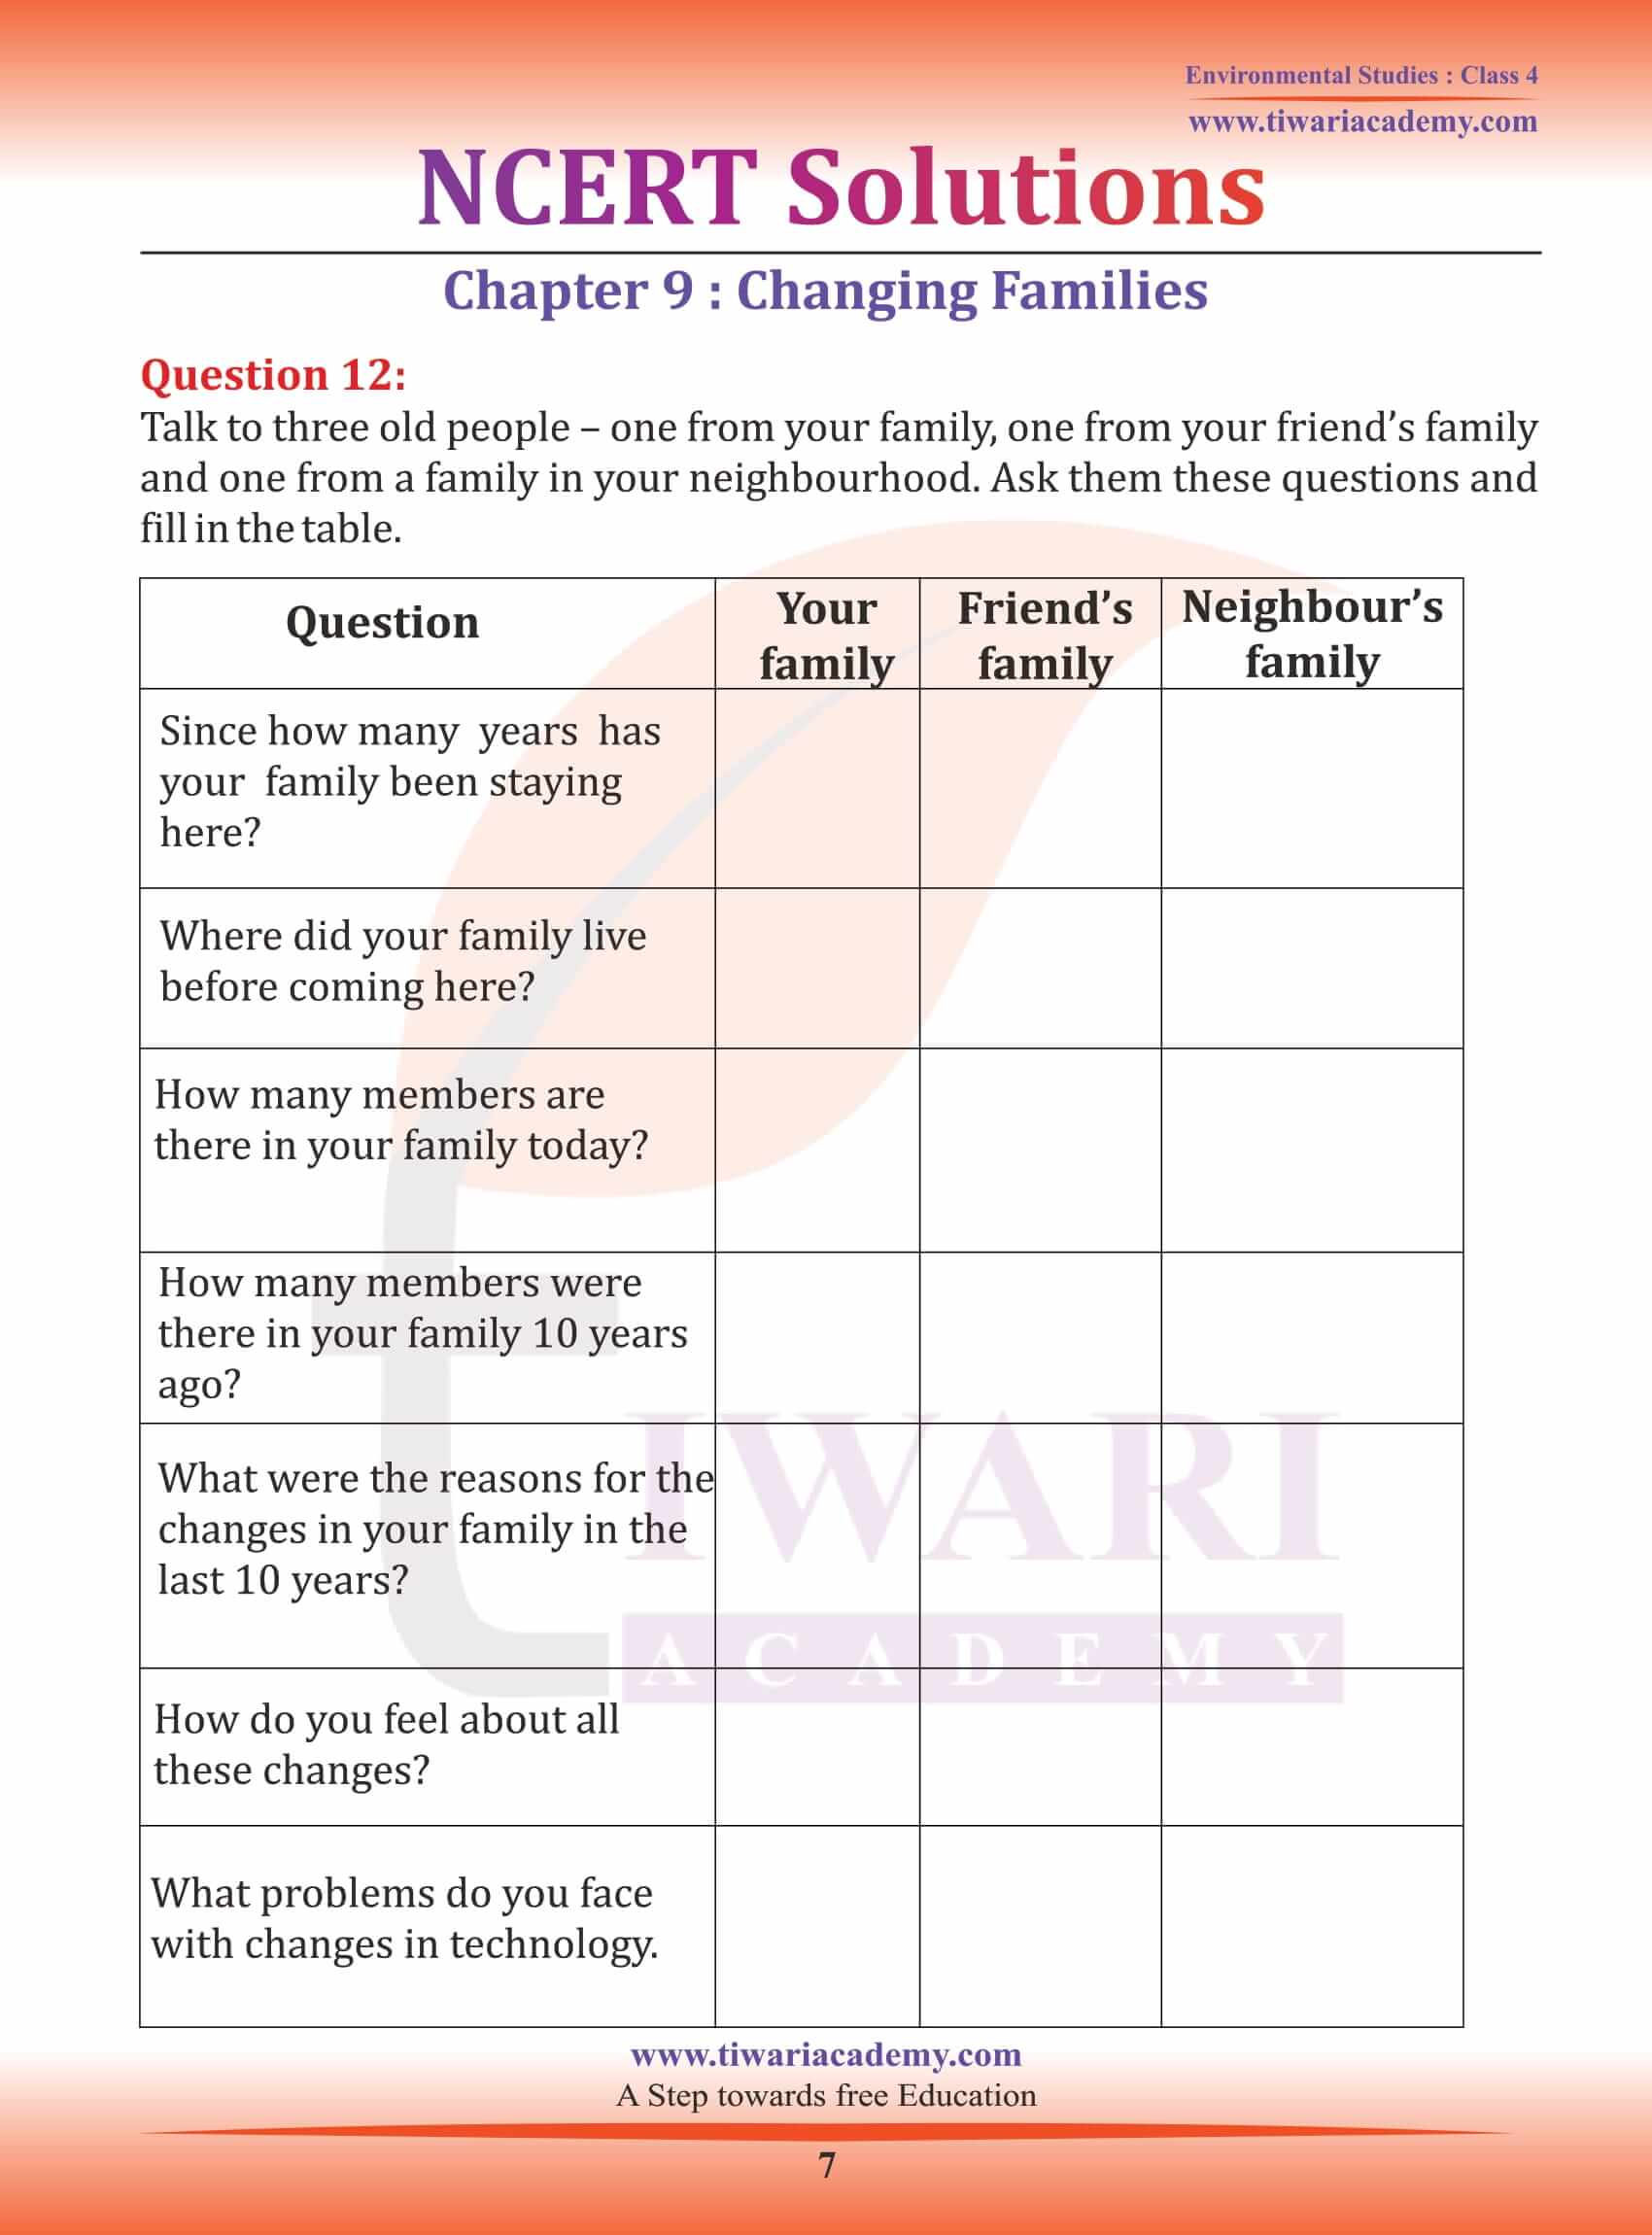 NCERT Solutions for Class 4 EVS Chapter 9 updated for new session